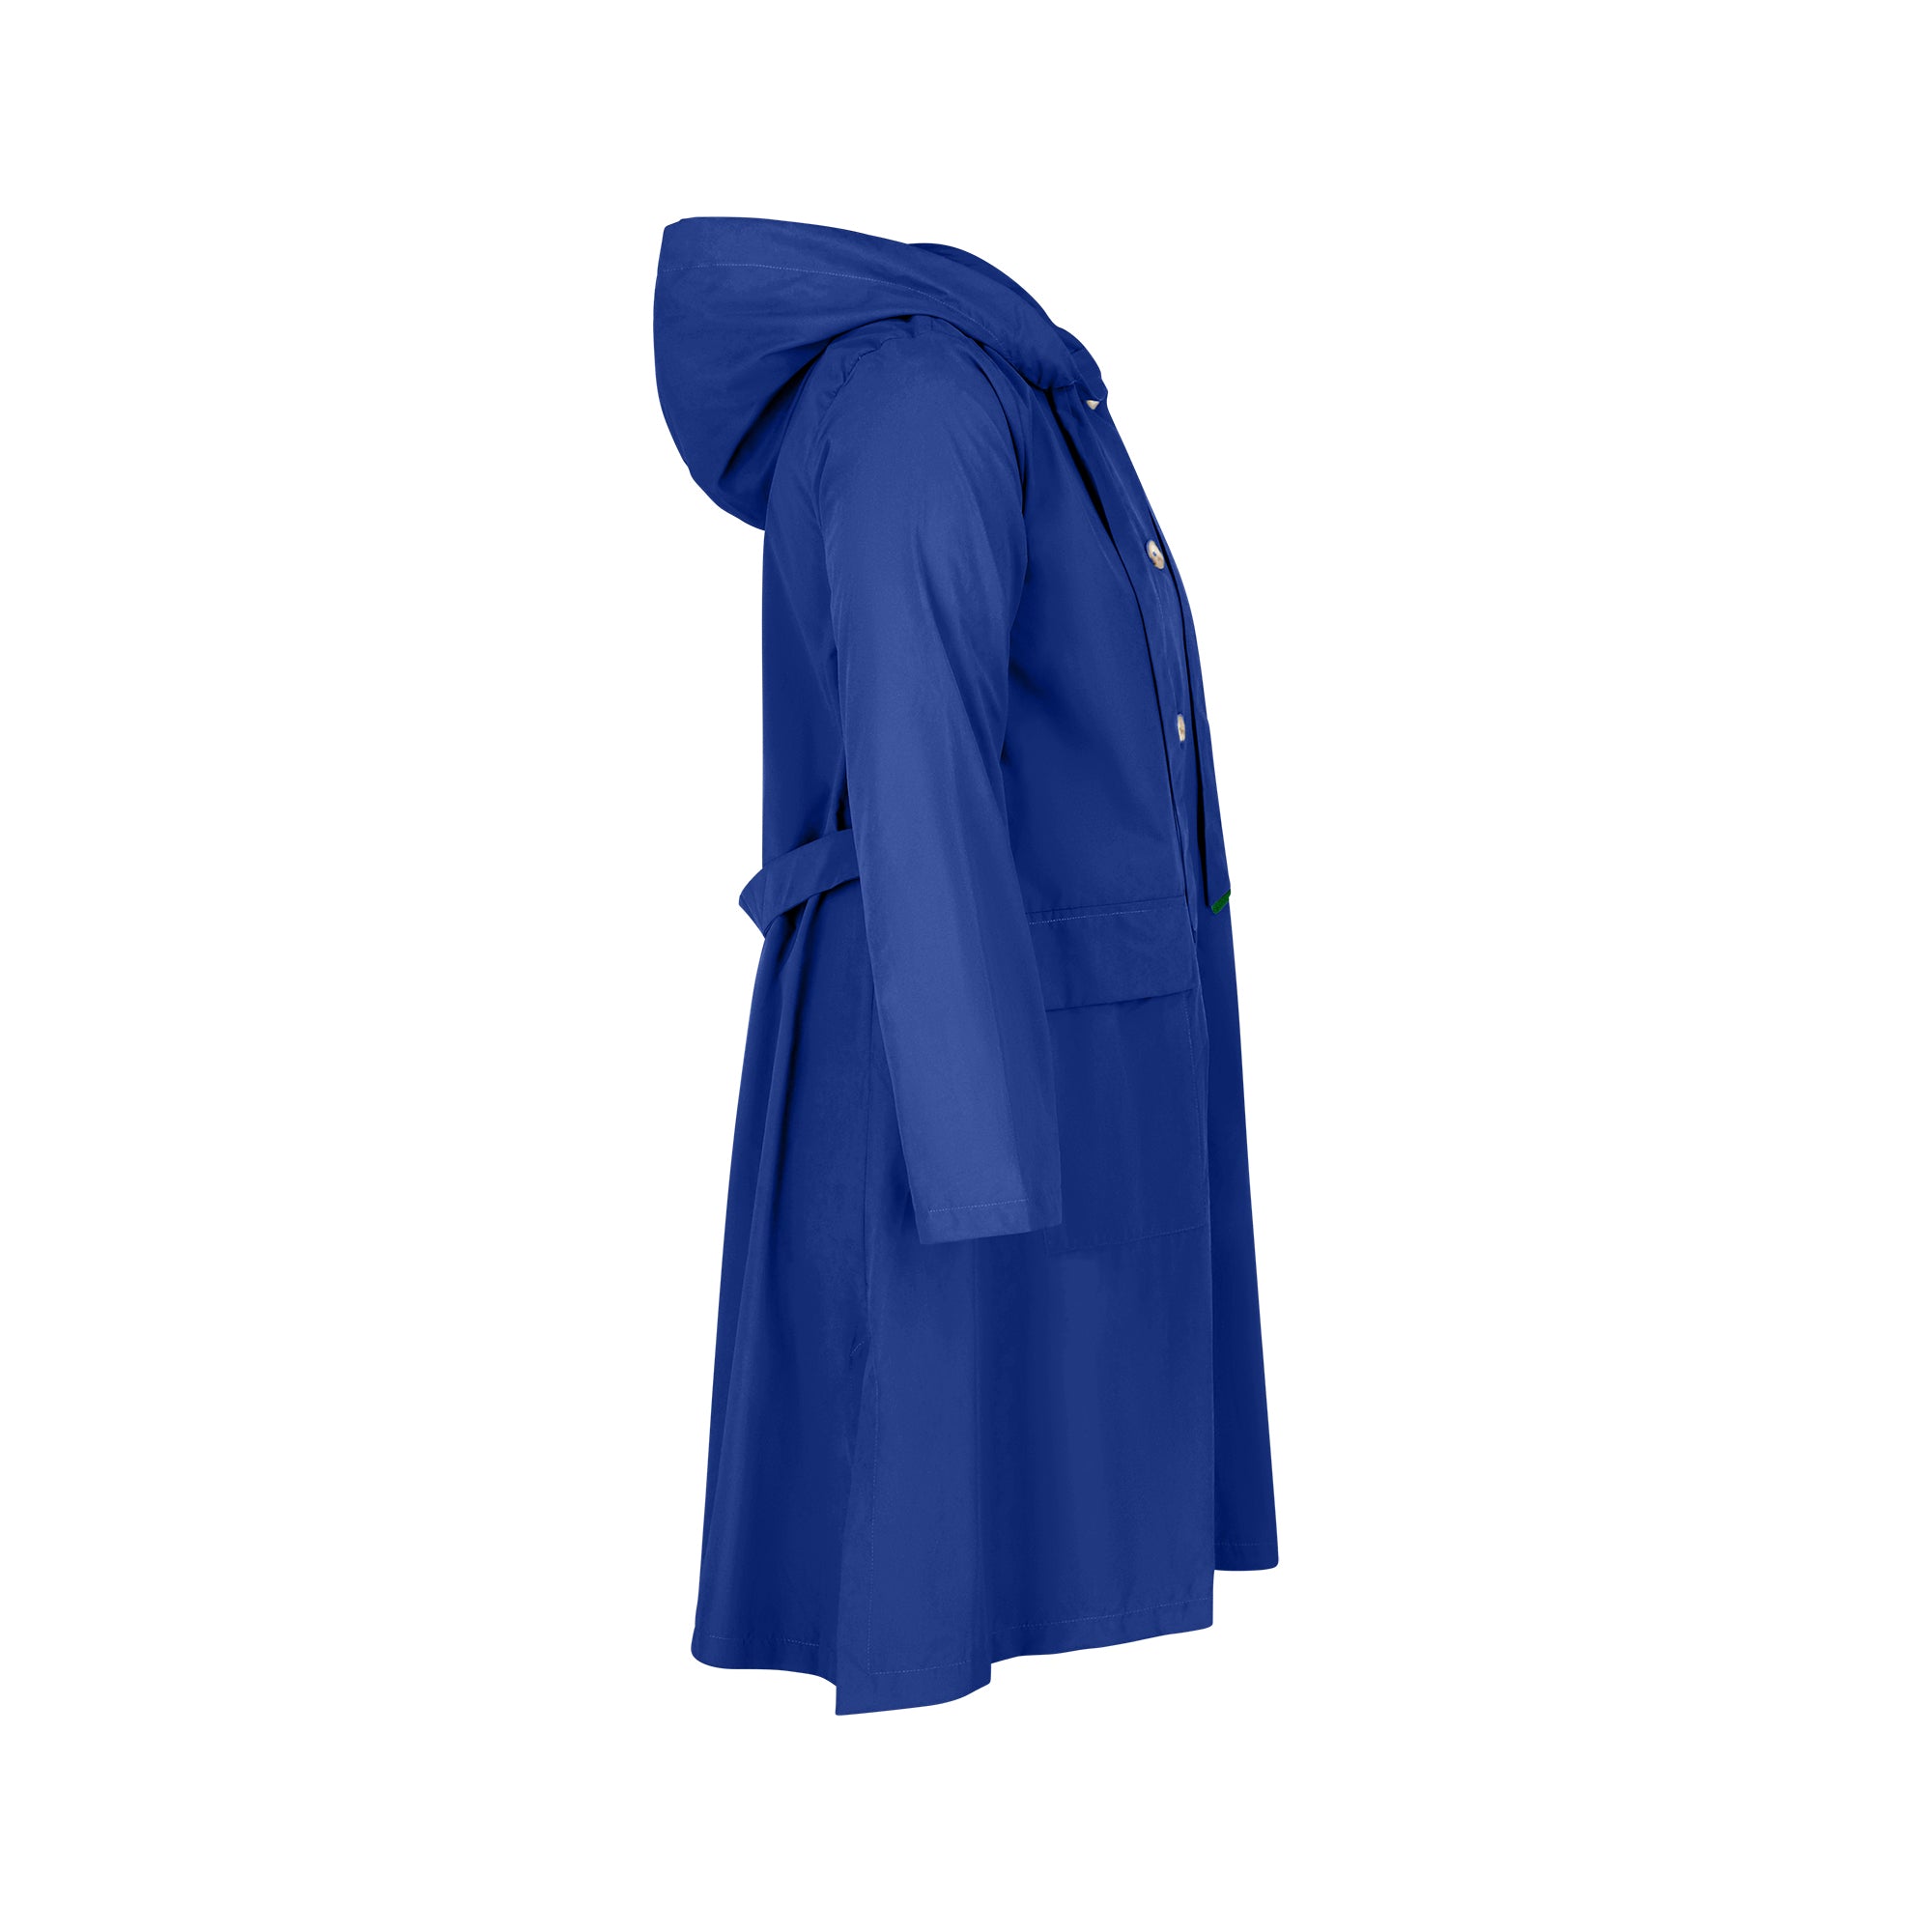 The Classic - royal blue color - side view